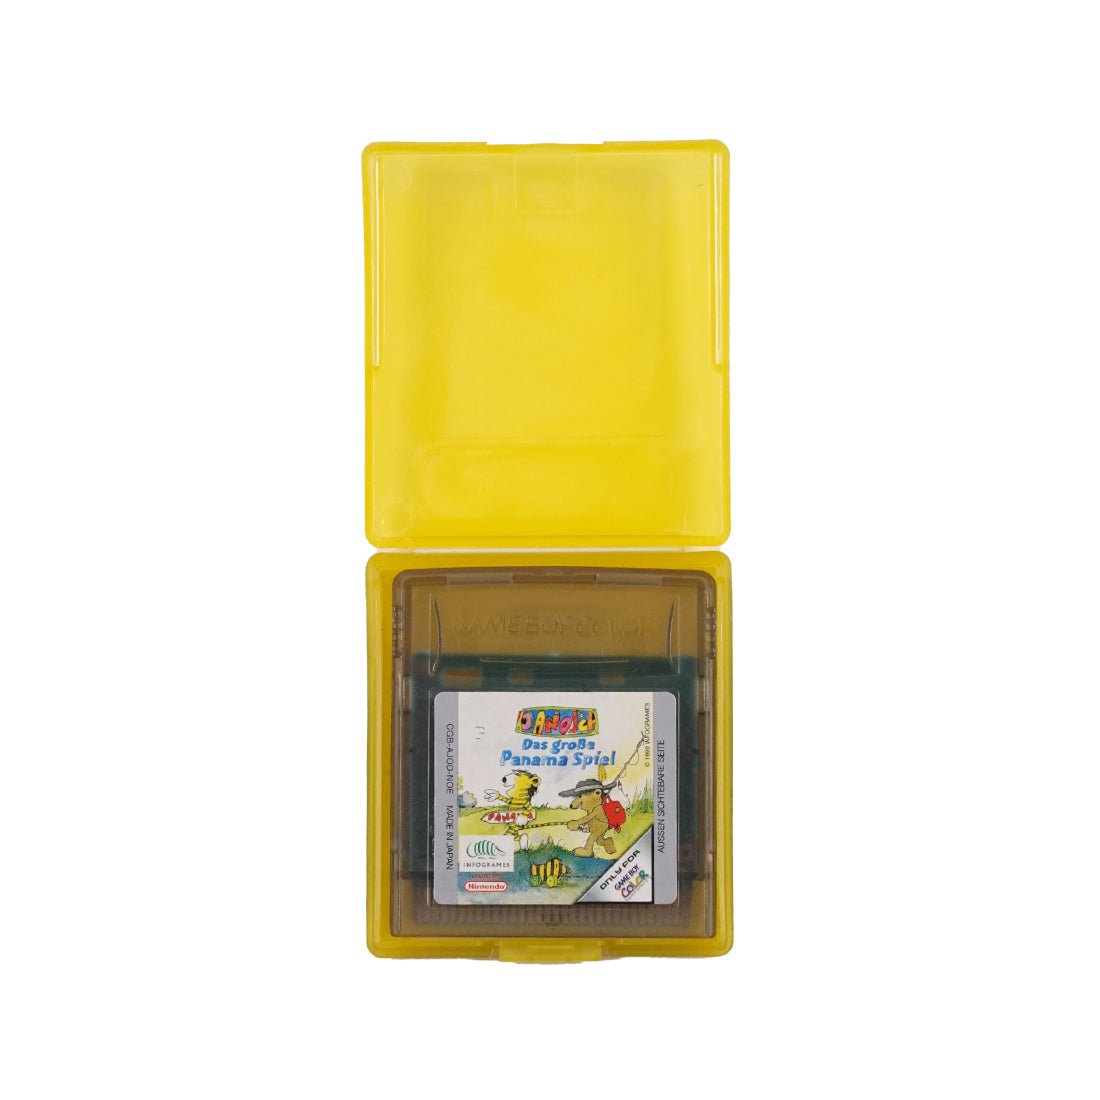 (Pre-Owned) Panama Spiel - Gameboy Classic - Store 974 | ستور ٩٧٤